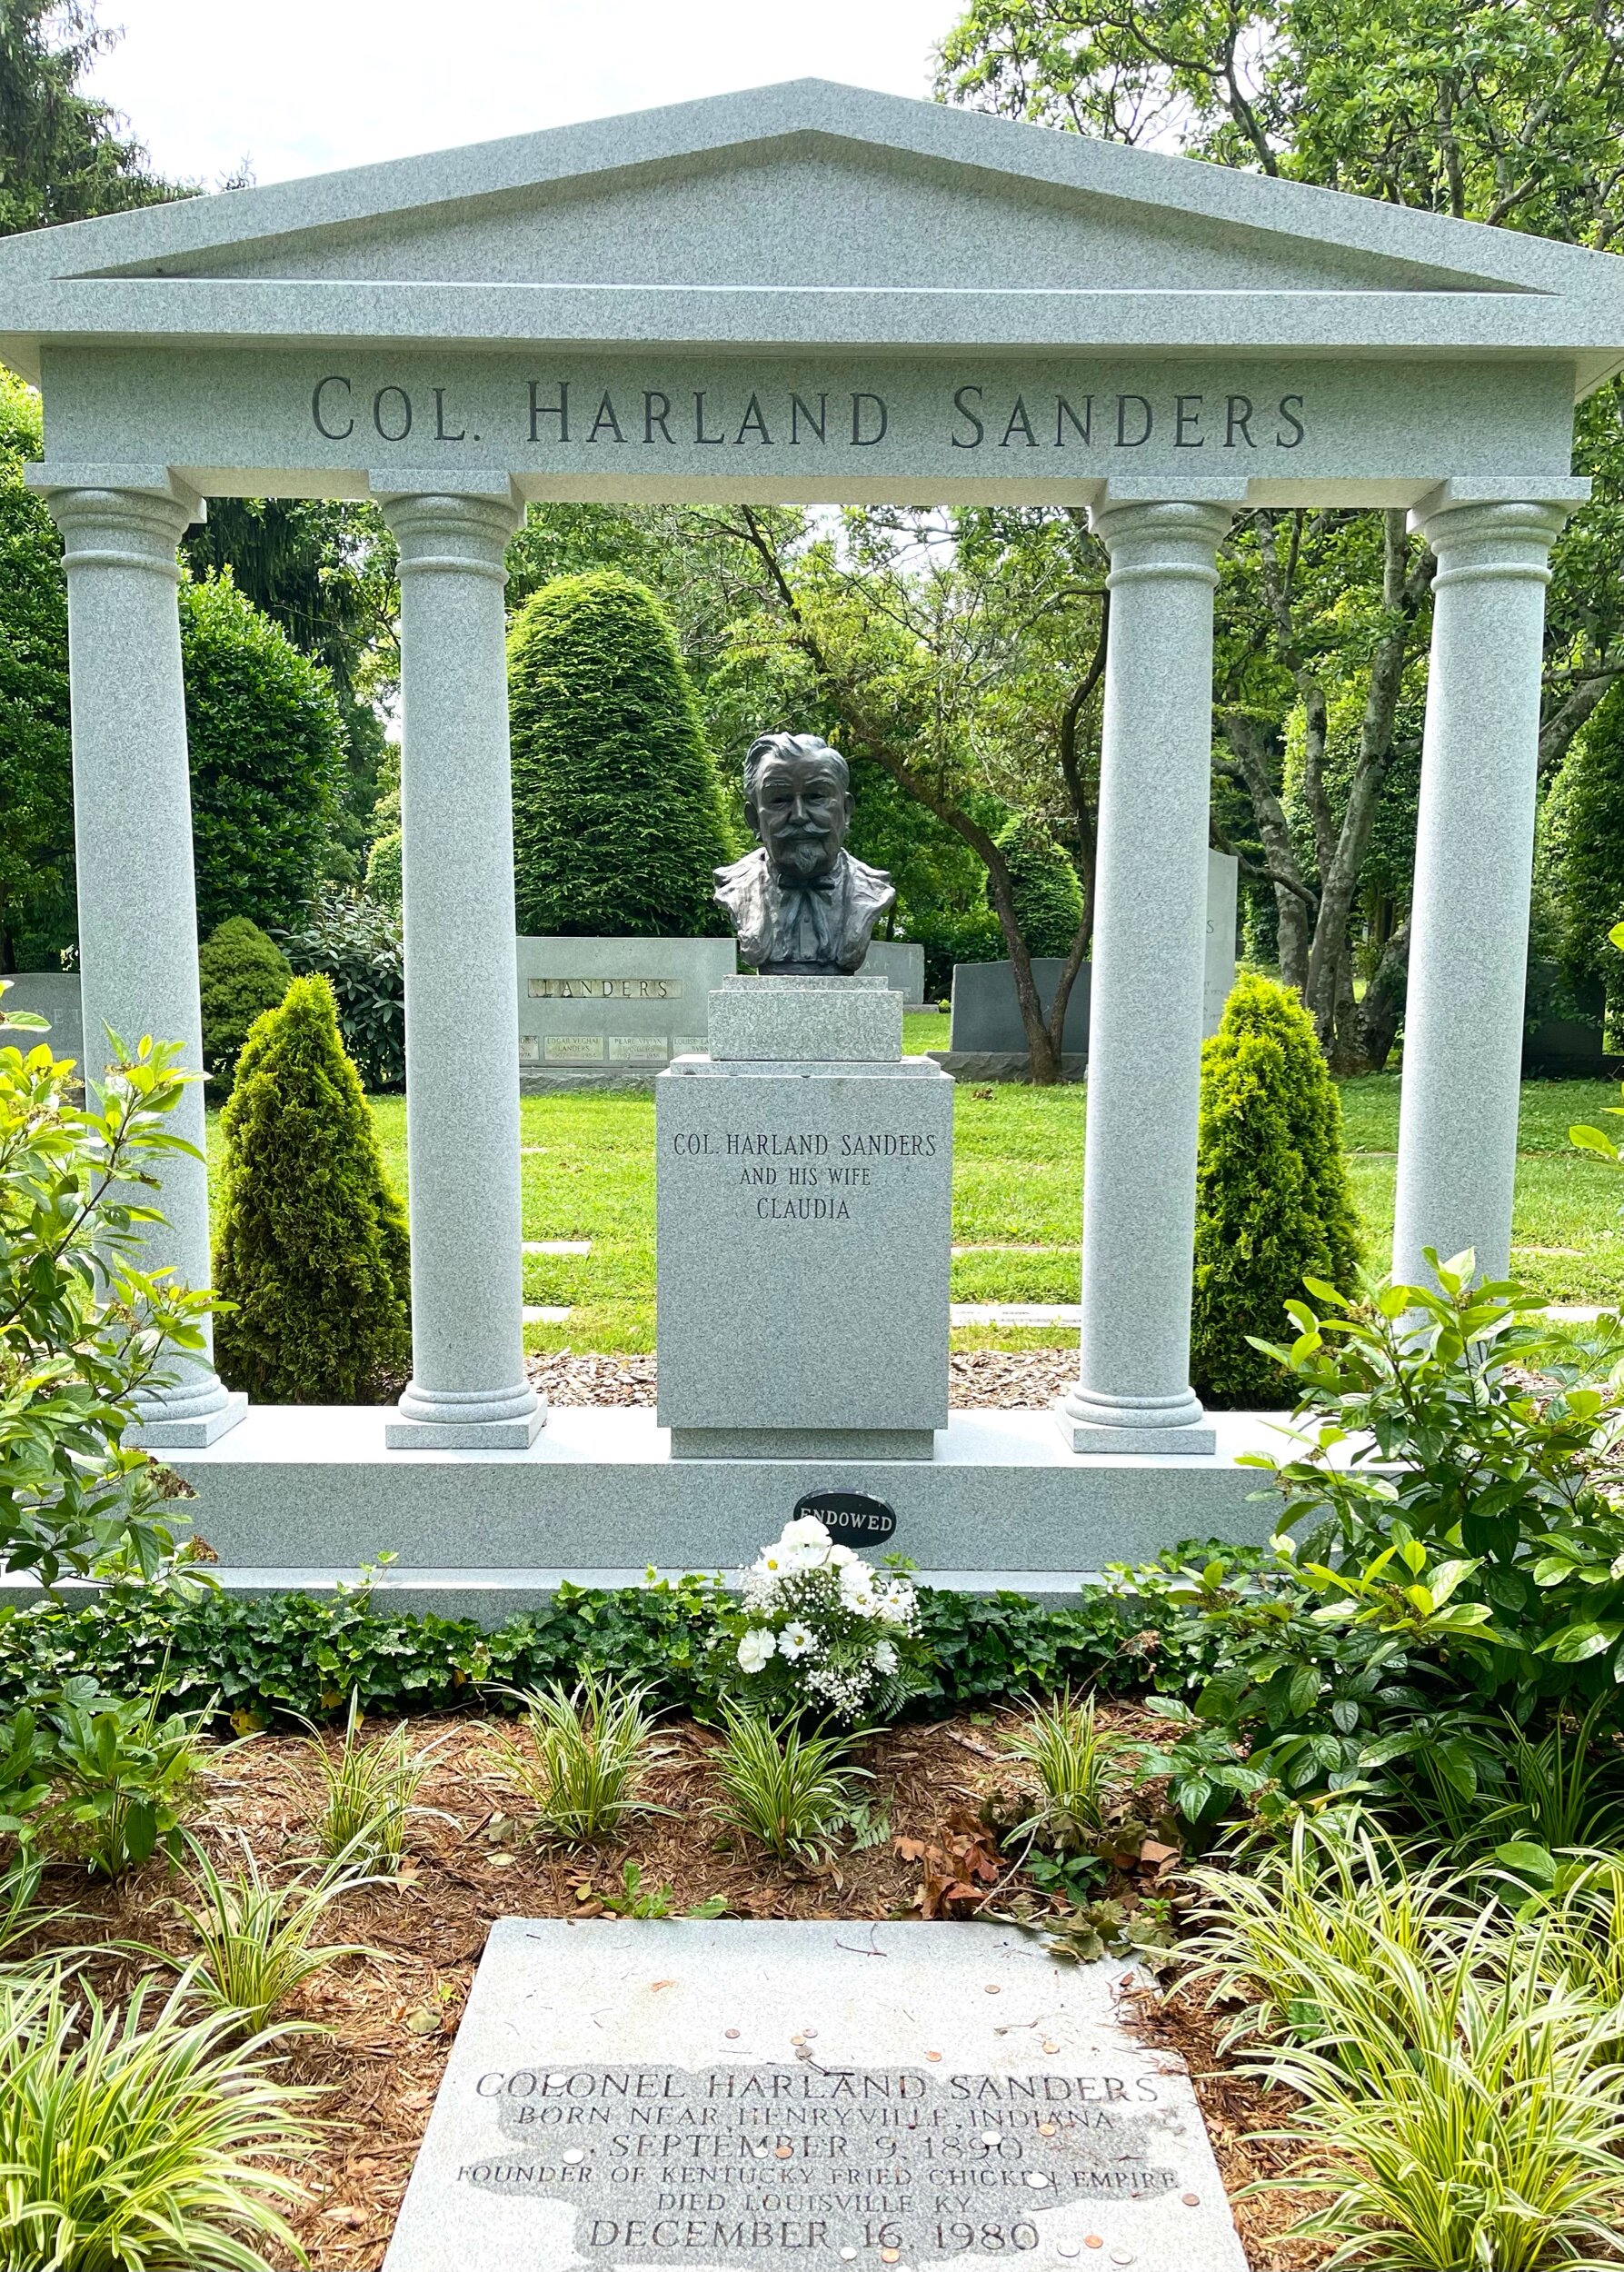  The sculpture overlooking  Colonel Harland Sanders’  grave was sculpted by Colonel Sanders’ daughter, Margaret. Margaret and her son, also named Harland, are buried beside her father. Harland’s gravestone beside his grandfather reads, “I sure had fu